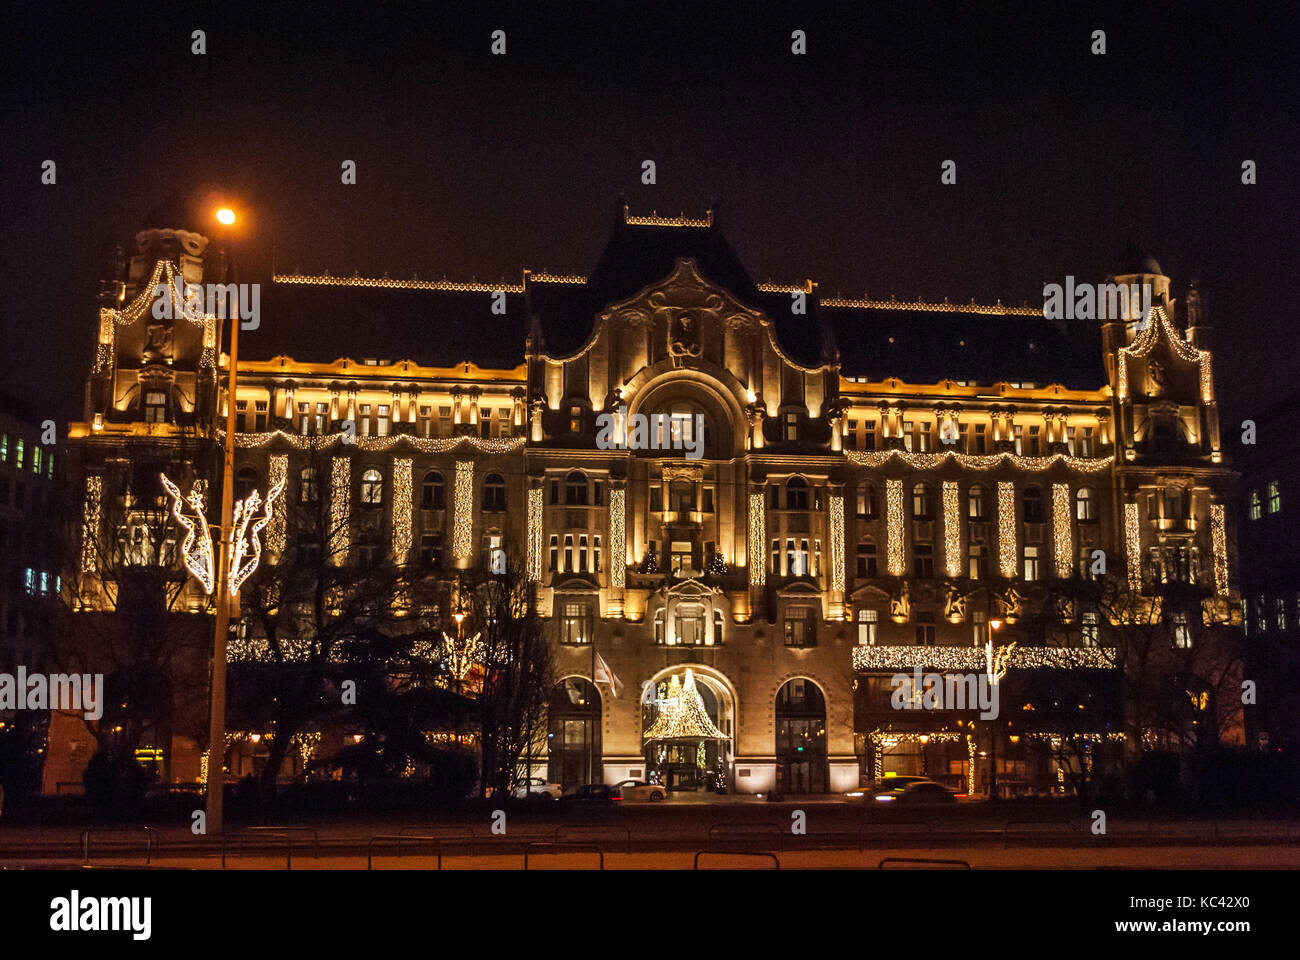 Budapest, Hungary - January 02, 2017: The Gresham Palace is a building in Budapest, Hungary, Completed in 1906 it is today the Four Seasons Hotel Buda Stock Photo